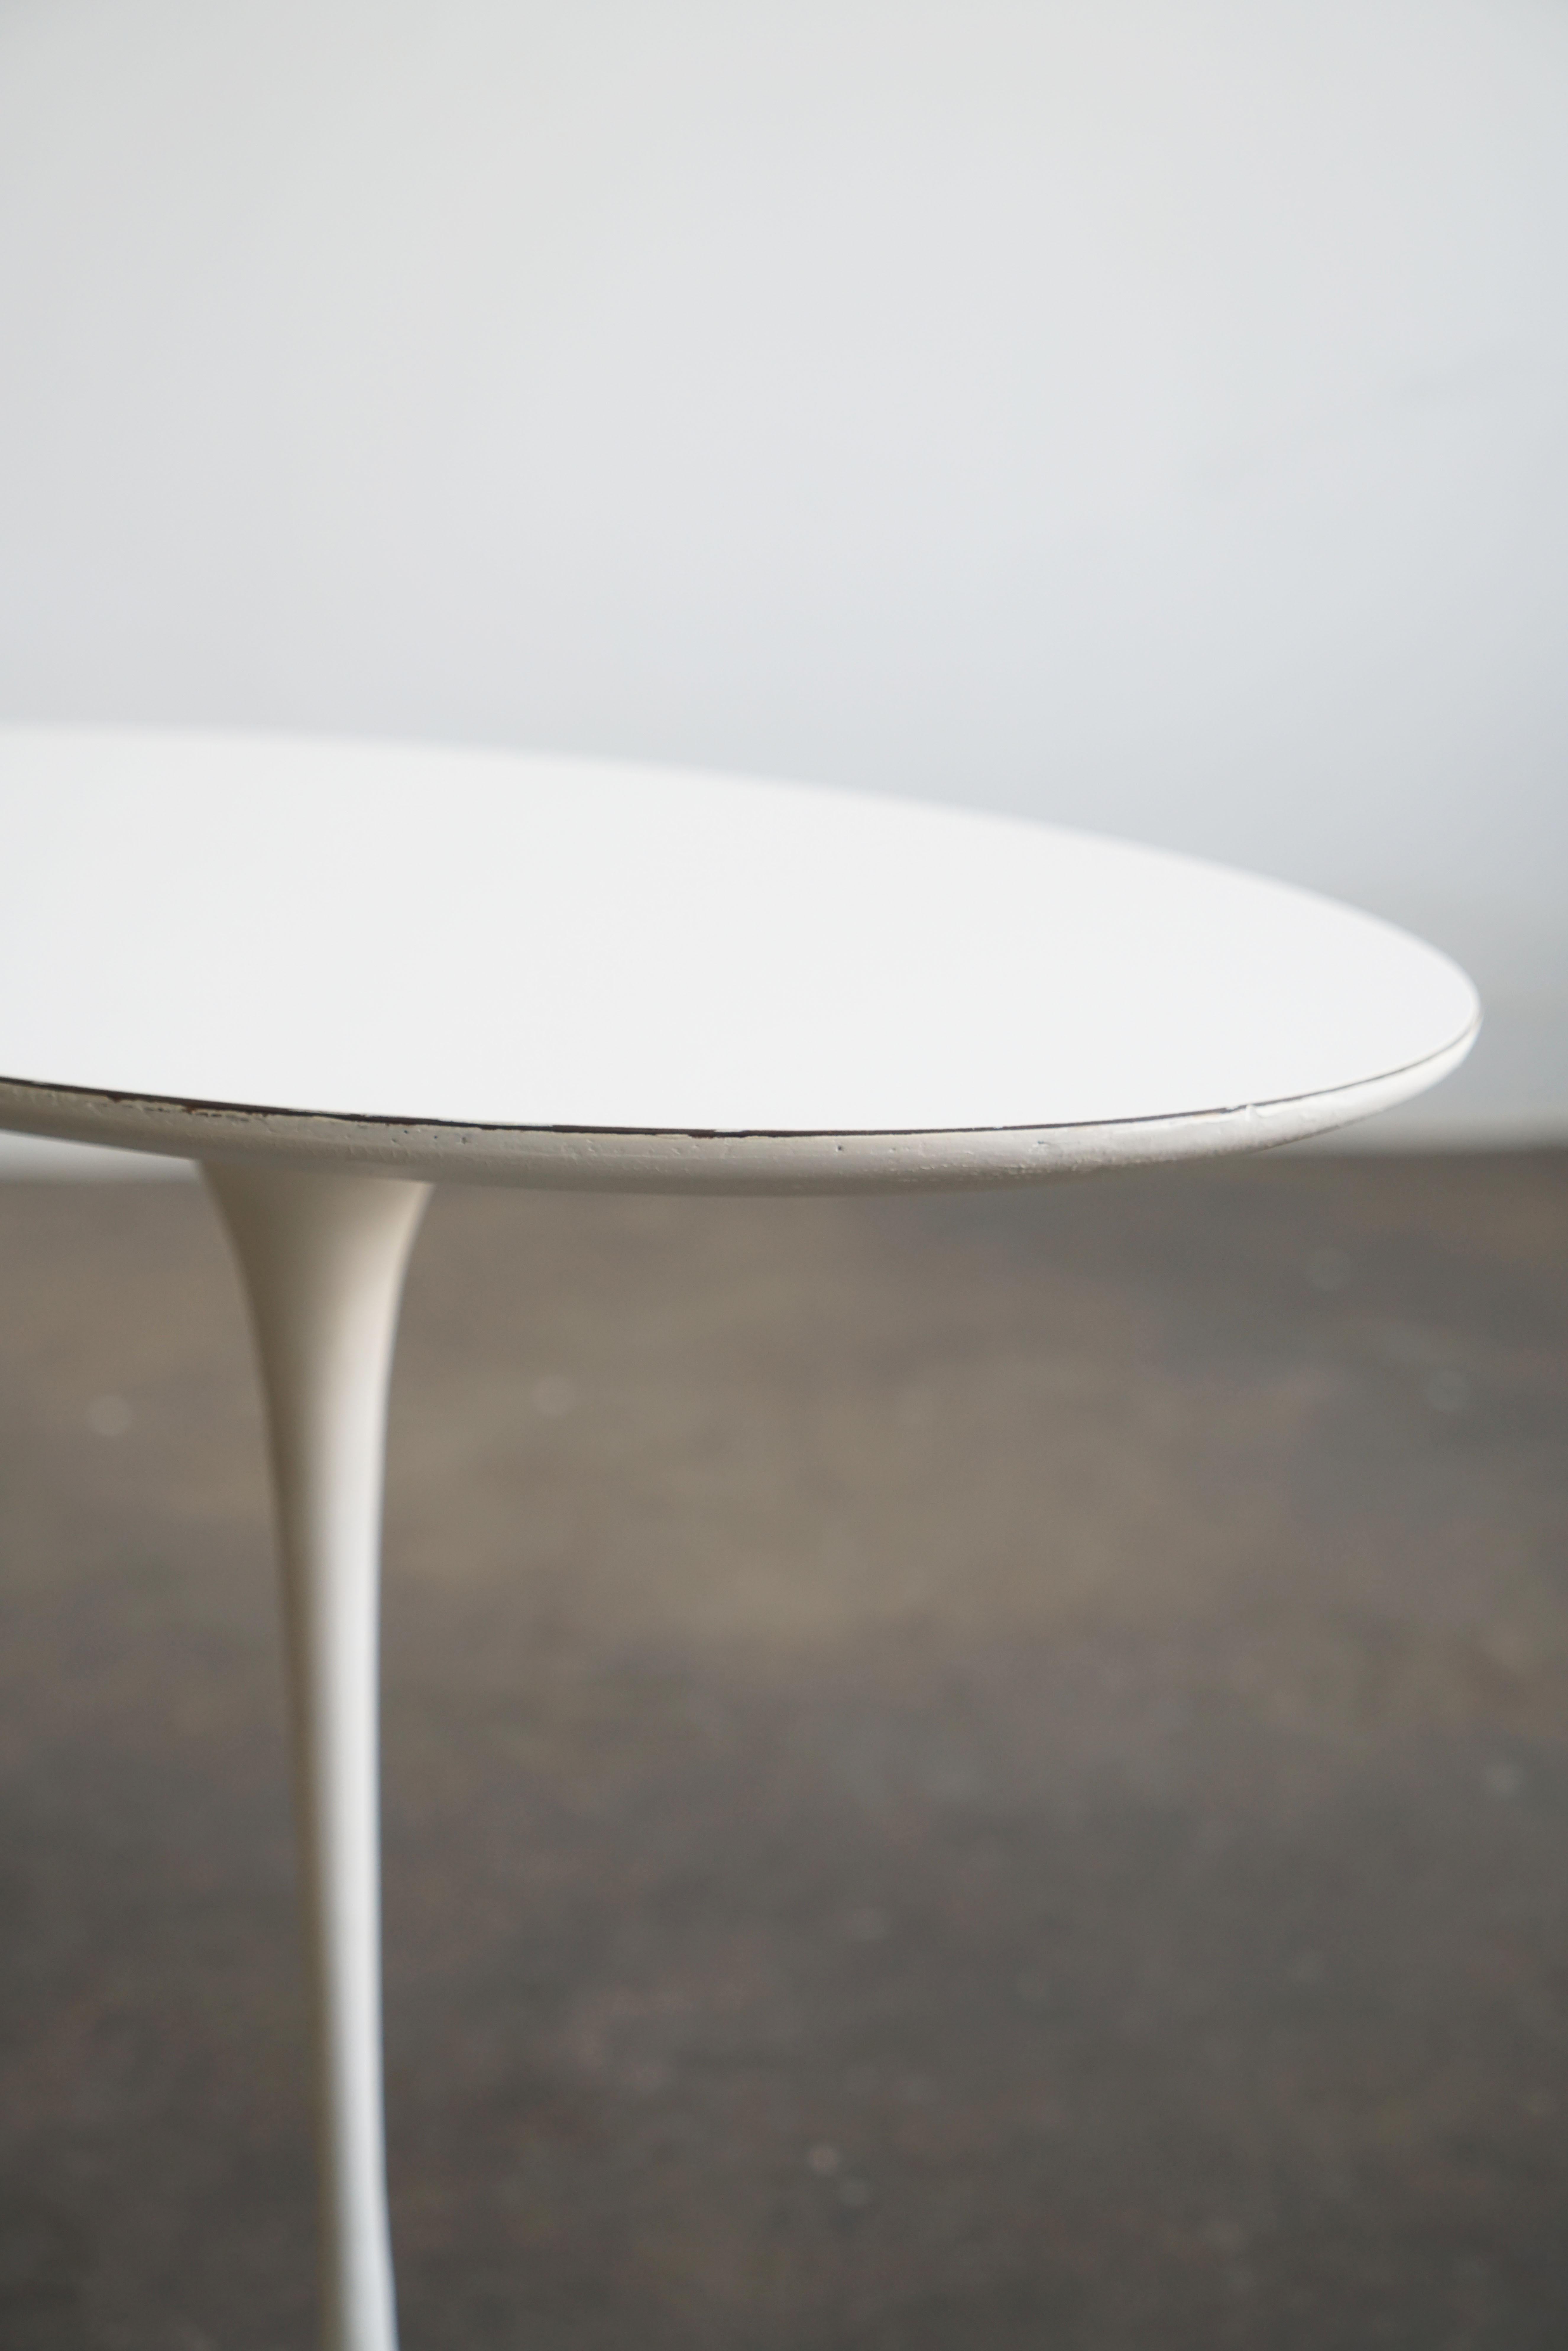 Mid-20th Century Very early Eero Saarinen for Knoll Tulip table, oval shaped top circa 1957 For Sale